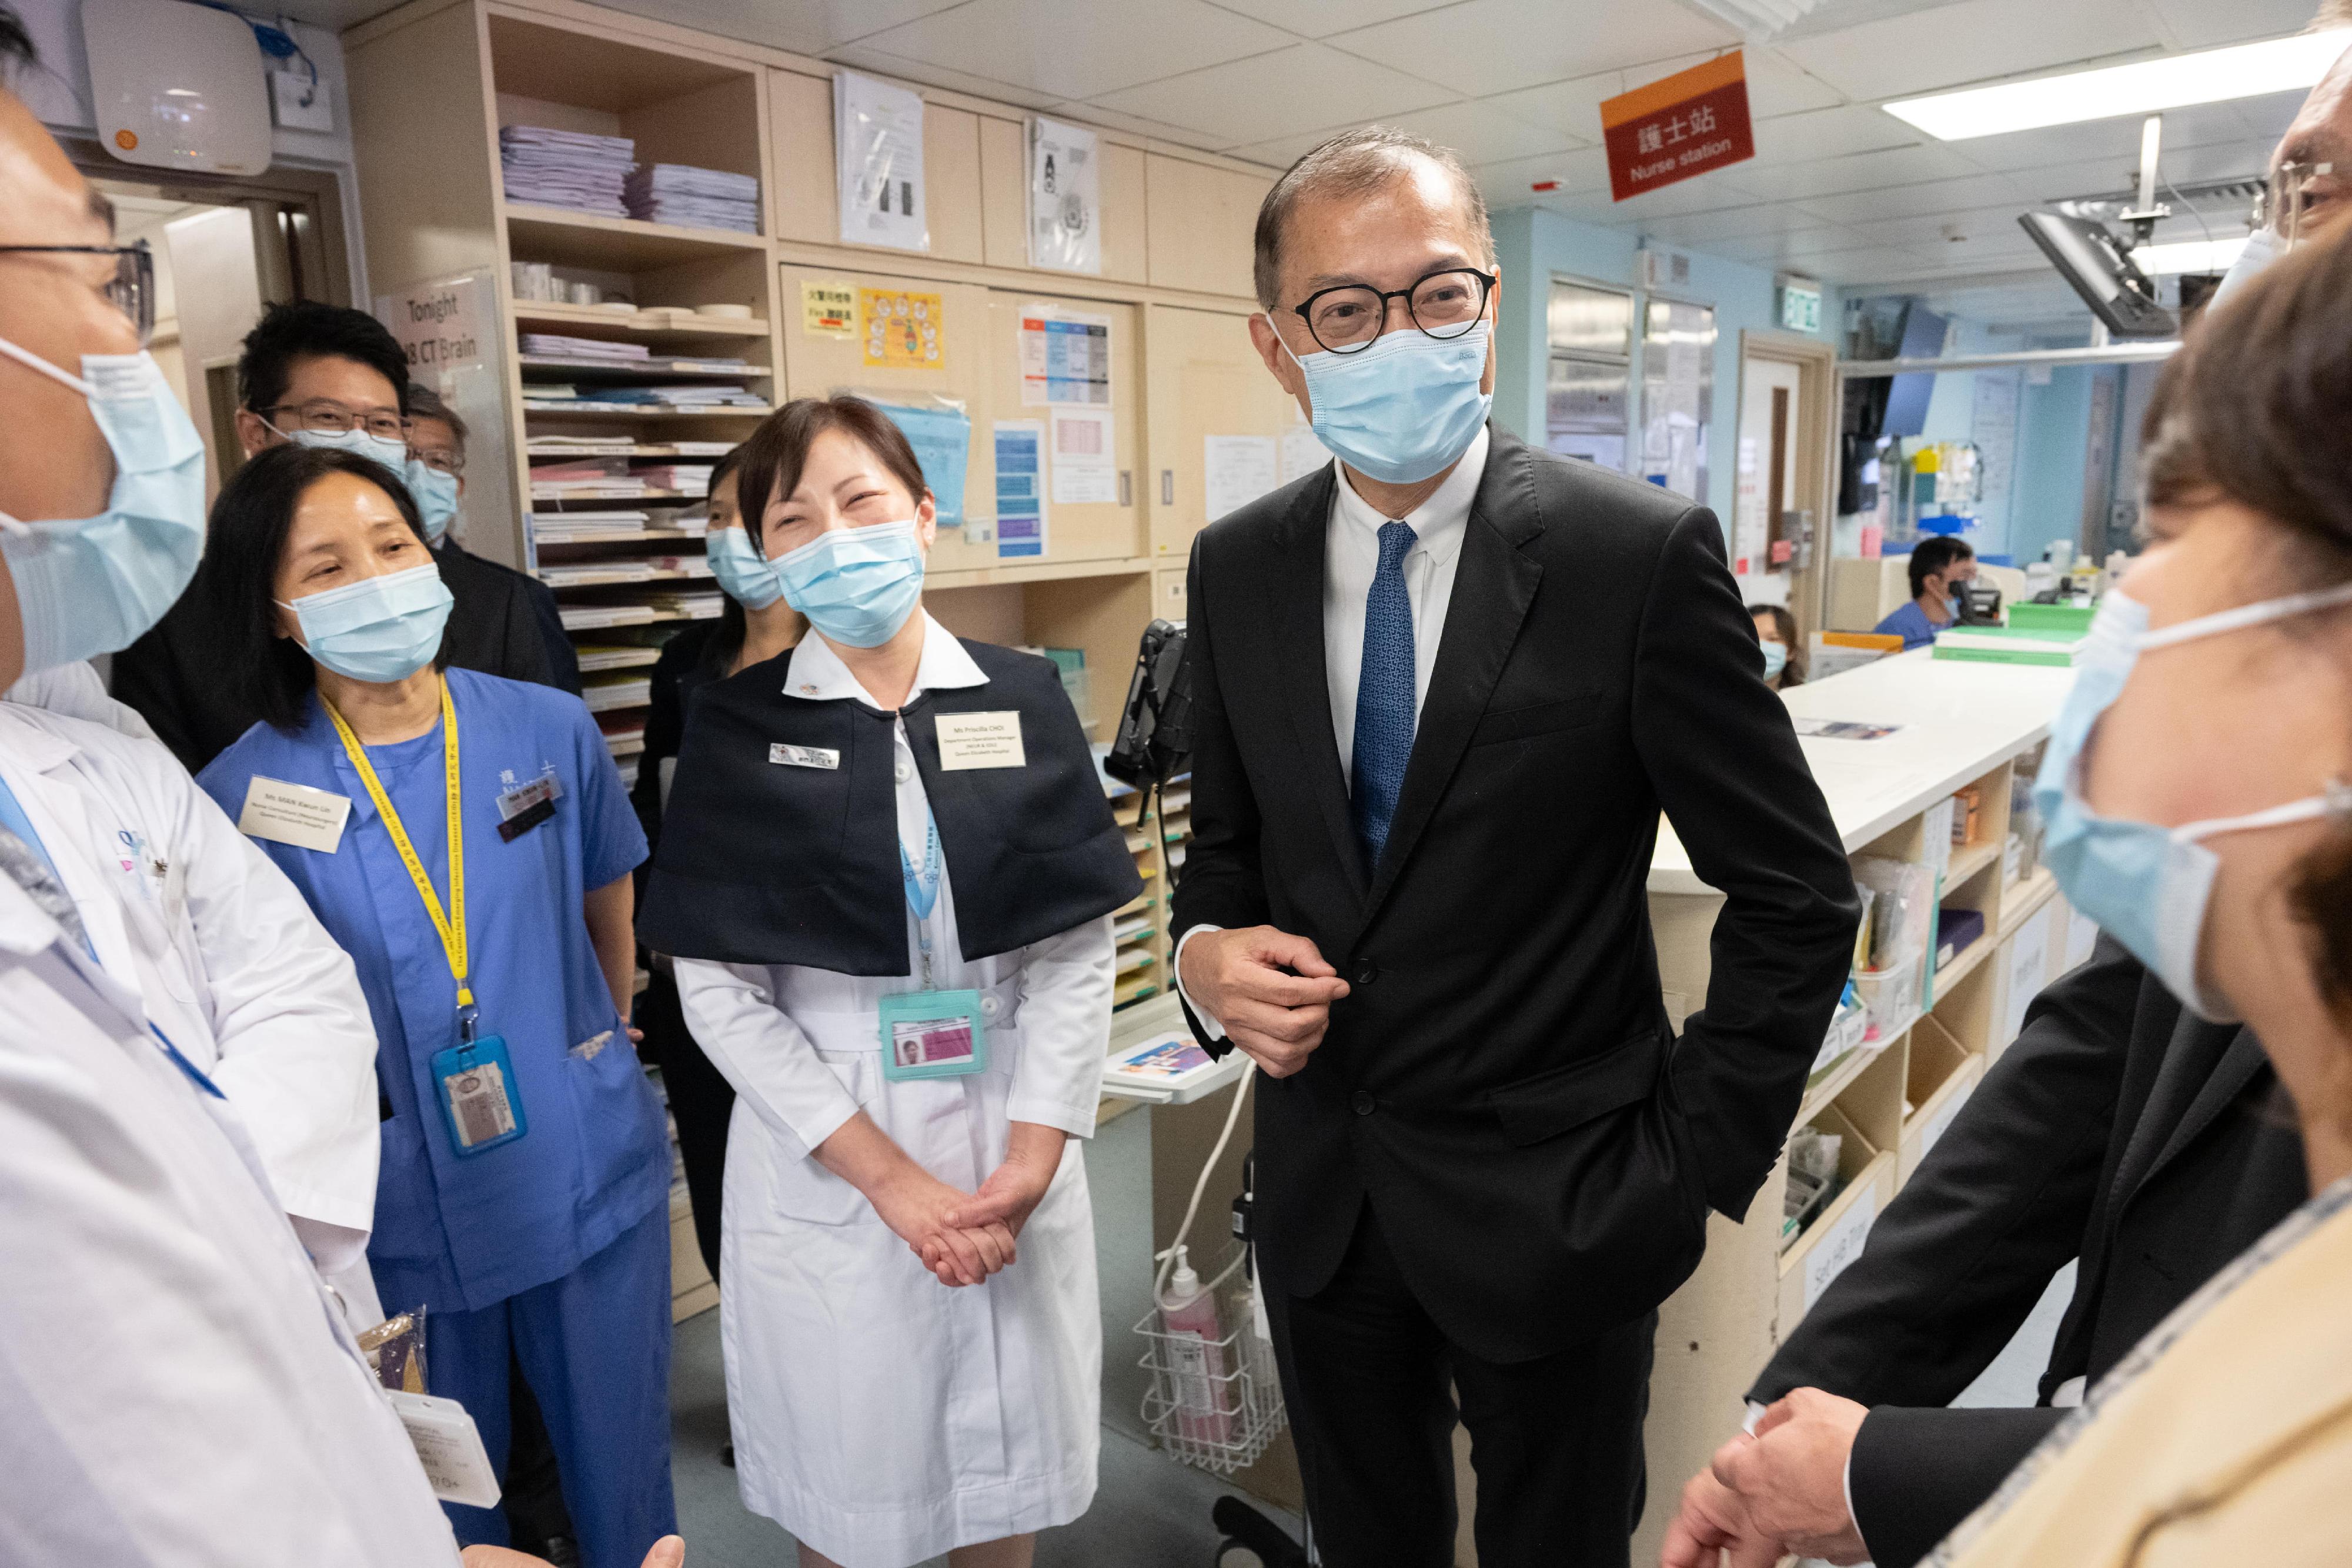 The Secretary for Health, Professor Lo Chung-mau (right), visits the Neurosurgical Special Care Ward of Queen Elizabeth Hospital and chats with healthcare staff today (August 9).